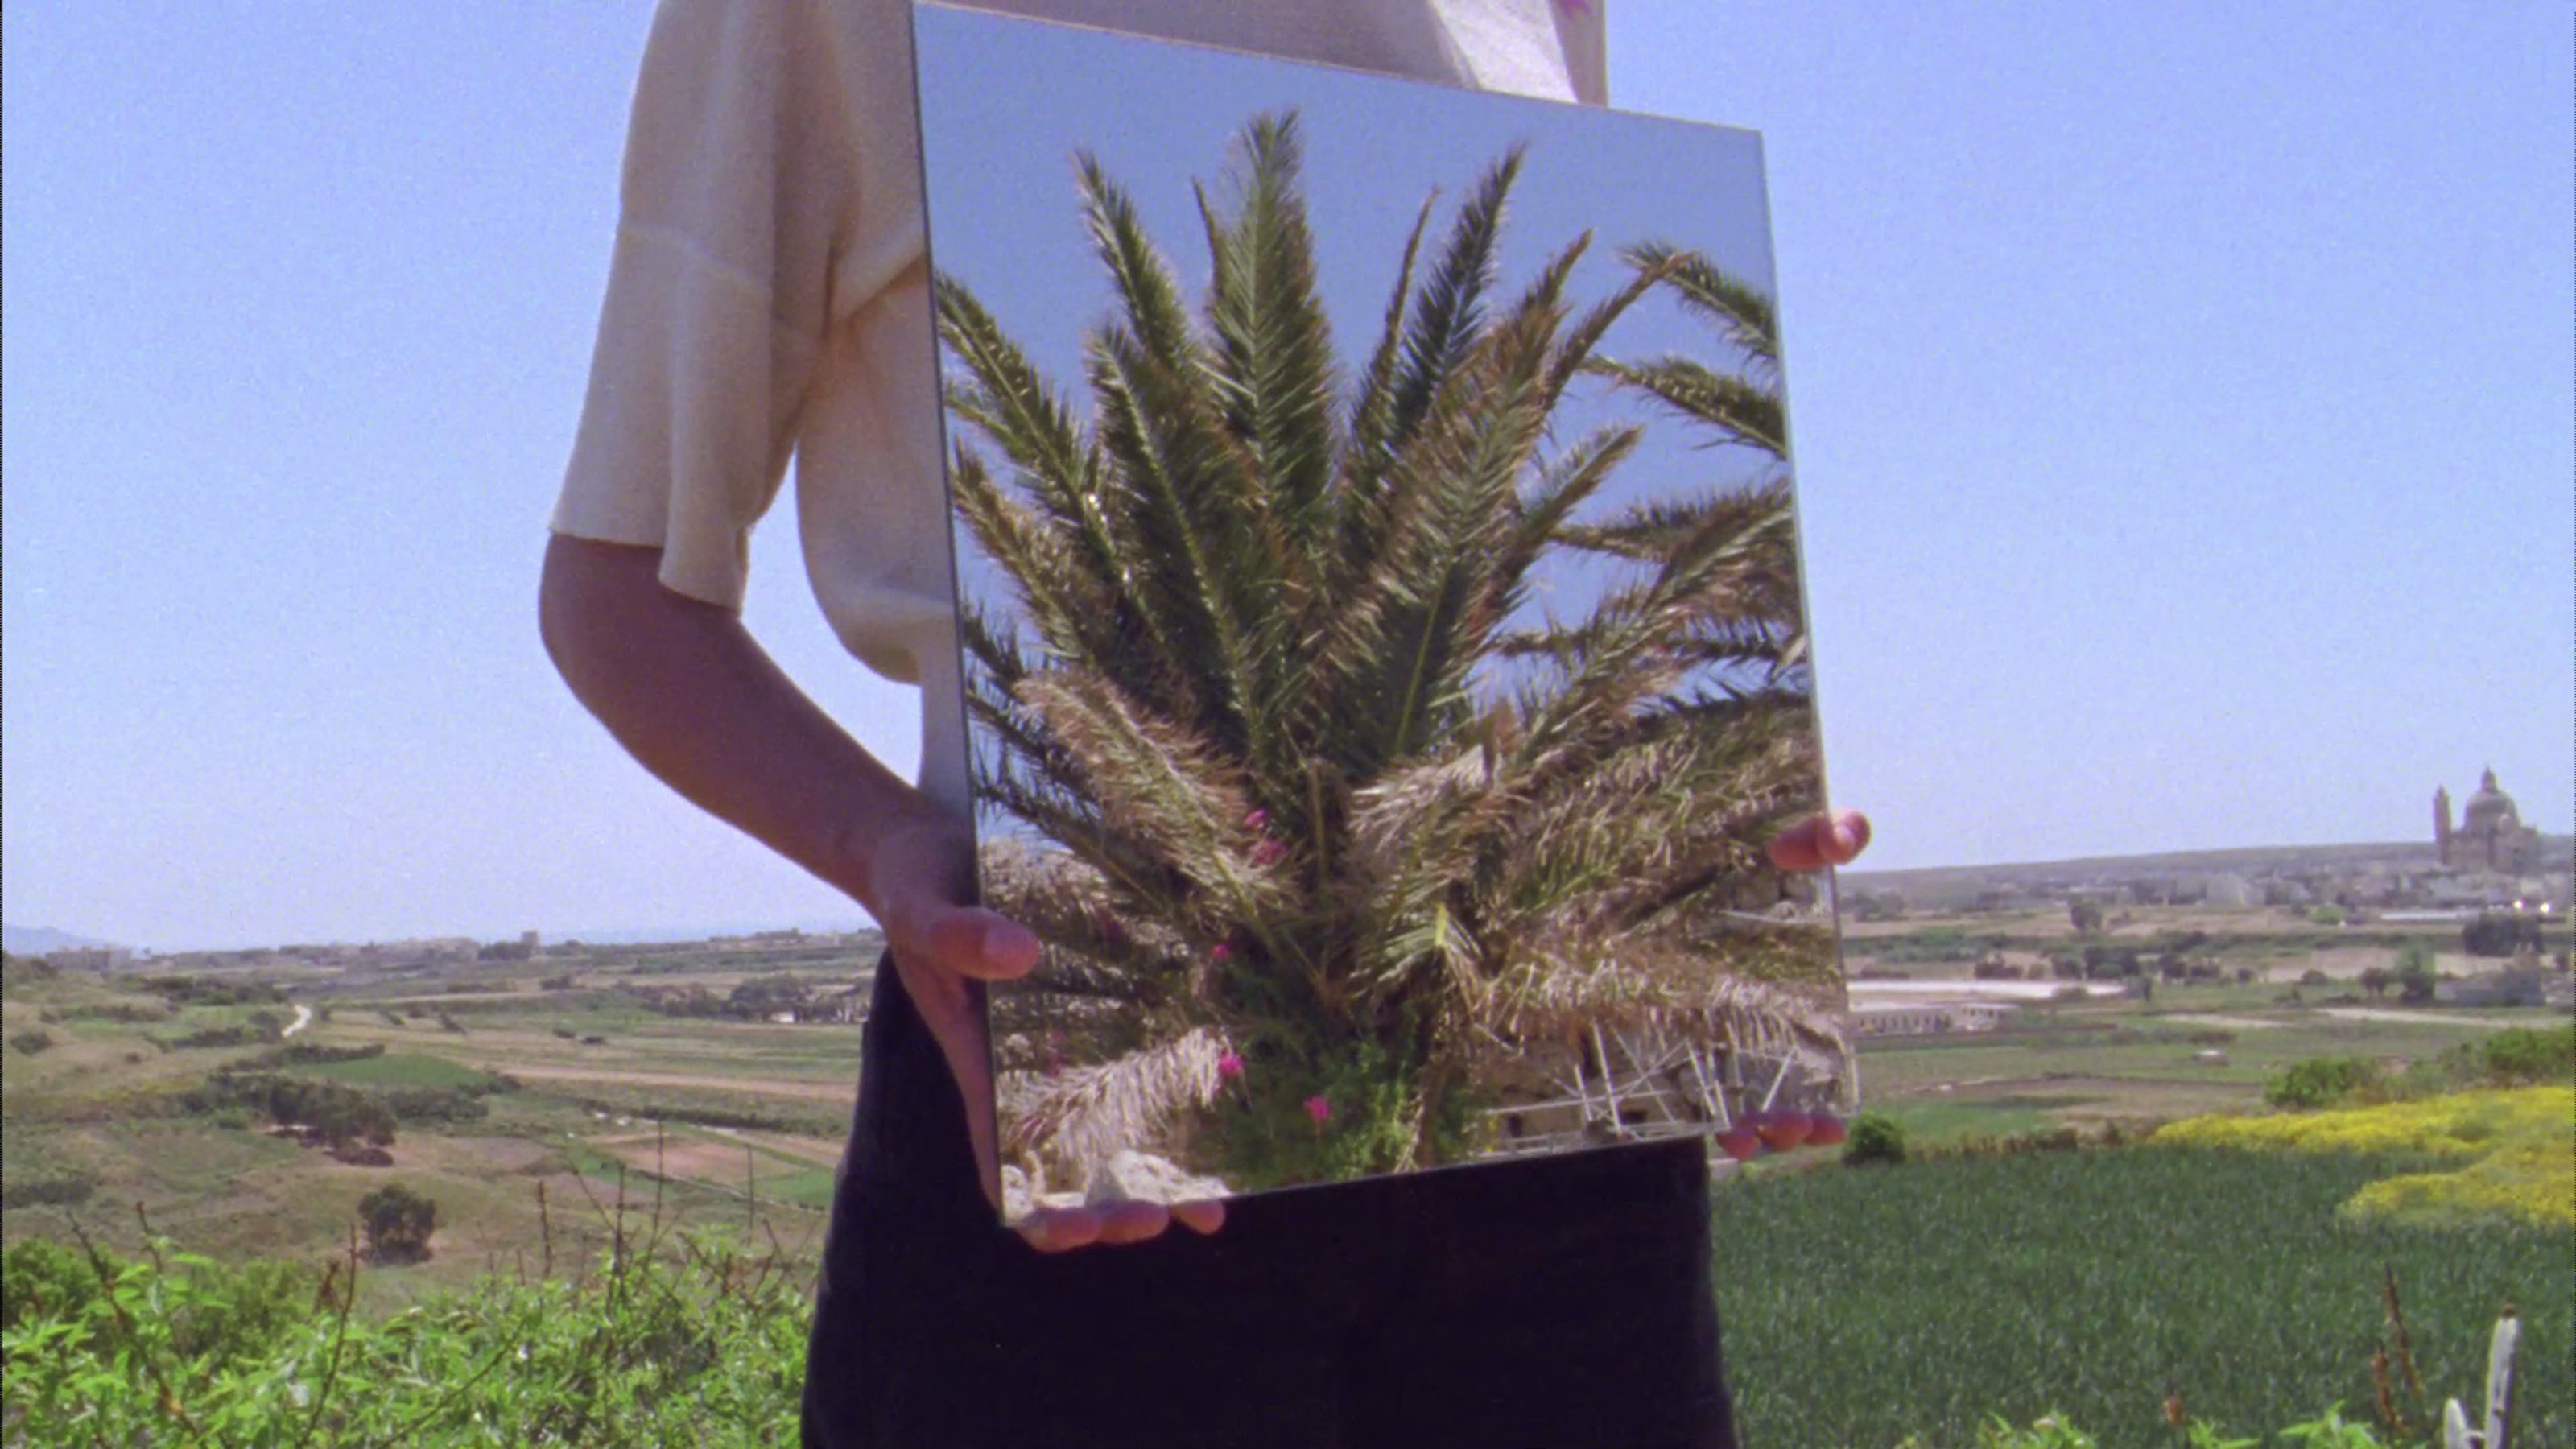 Person in an open field, holding a square mirror to their chest that shows the reflection of a palm tree